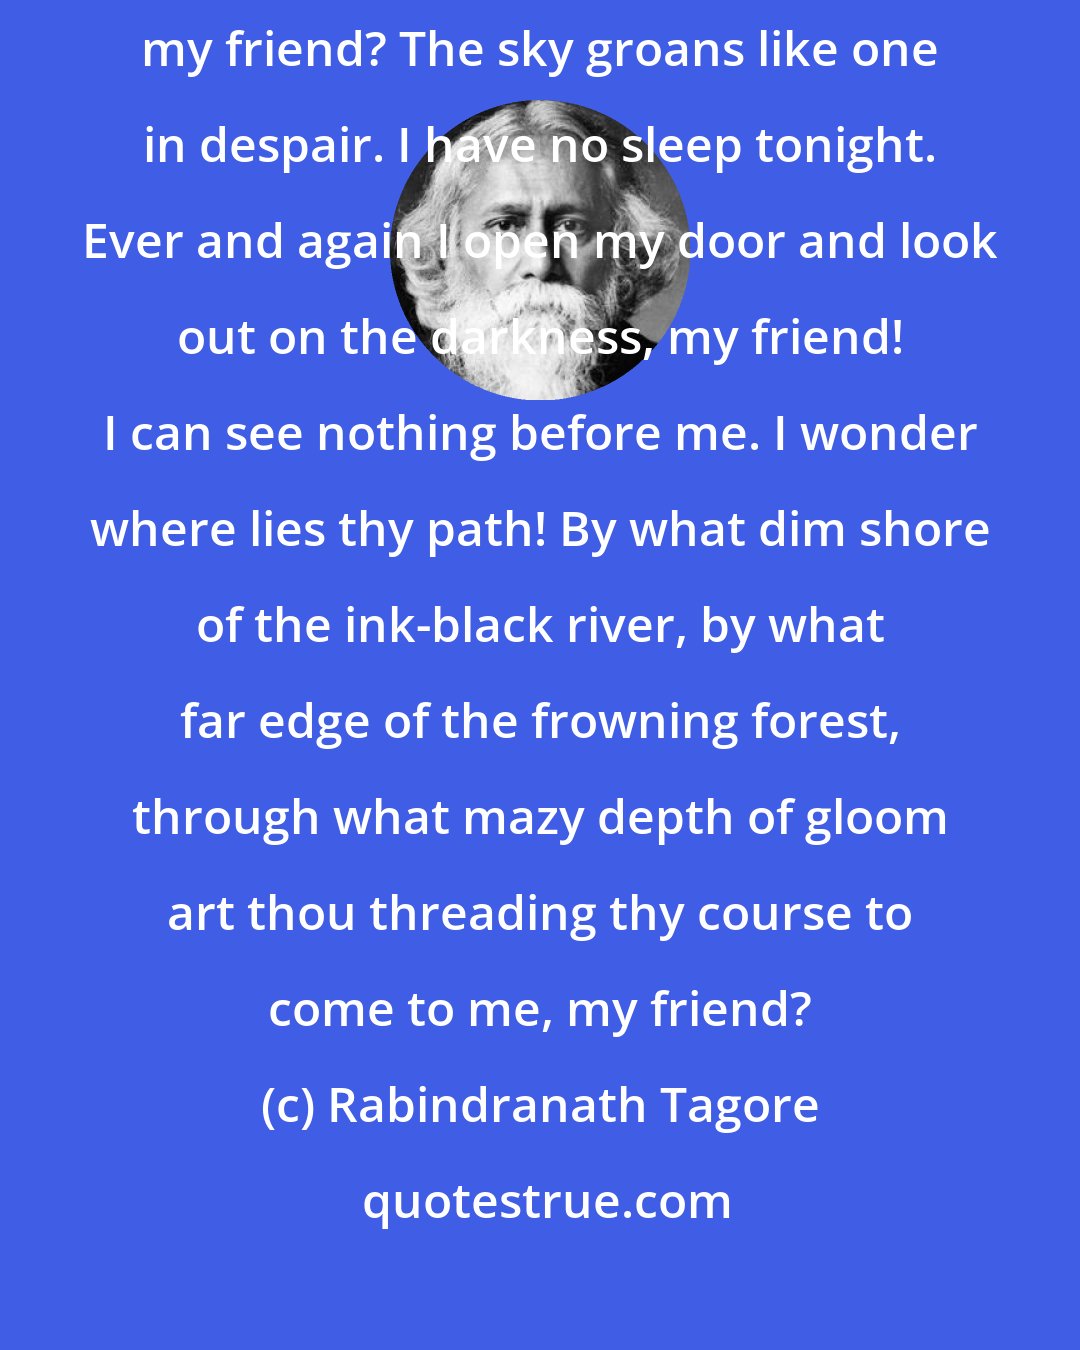 Rabindranath Tagore: My Friend: Art thou abroad on this stormy night on thy journey of love, my friend? The sky groans like one in despair. I have no sleep tonight. Ever and again I open my door and look out on the darkness, my friend! I can see nothing before me. I wonder where lies thy path! By what dim shore of the ink-black river, by what far edge of the frowning forest, through what mazy depth of gloom art thou threading thy course to come to me, my friend?